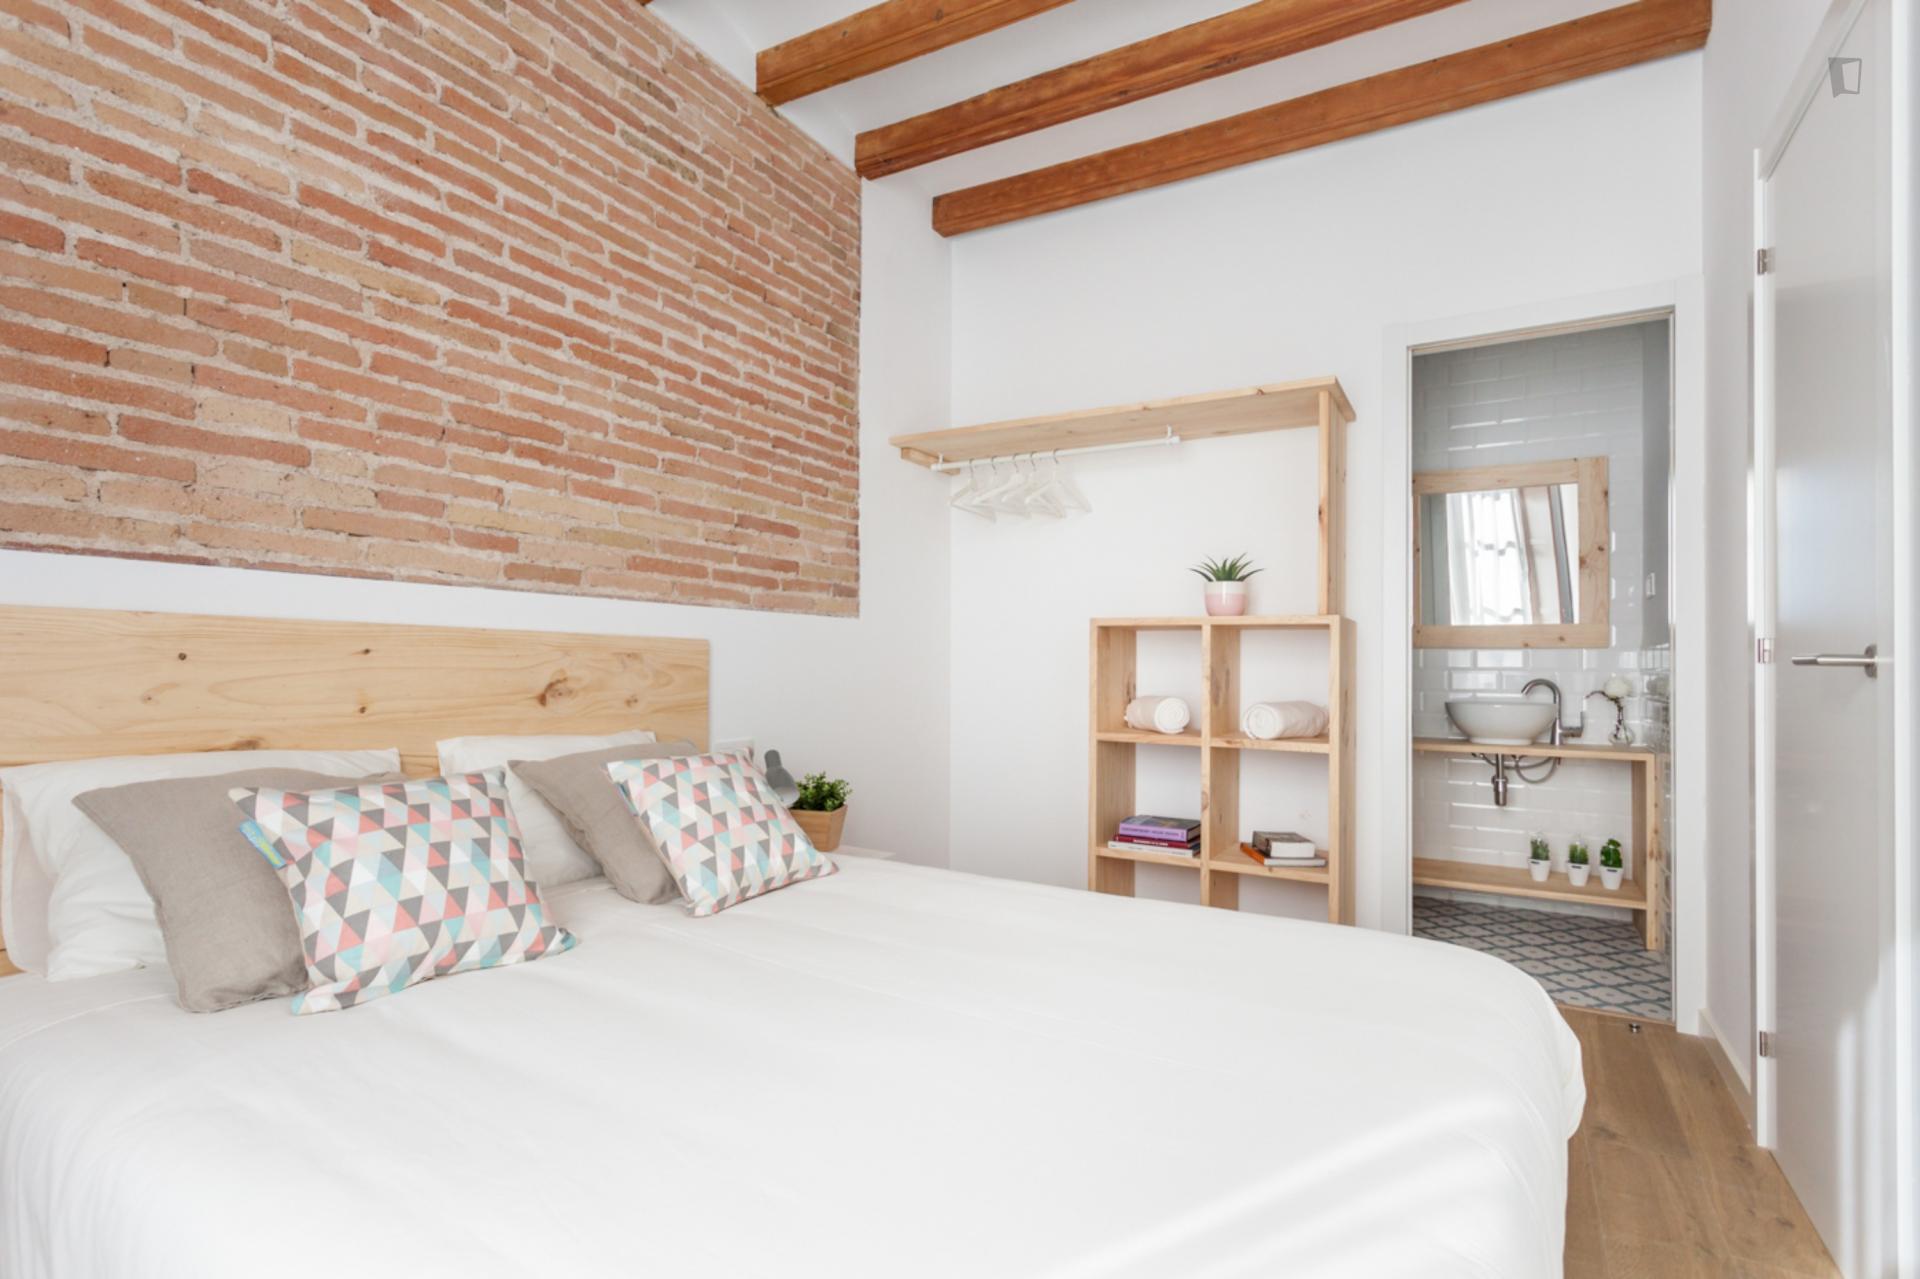 Paloma - Entry ready apartment in Barcelona for expats